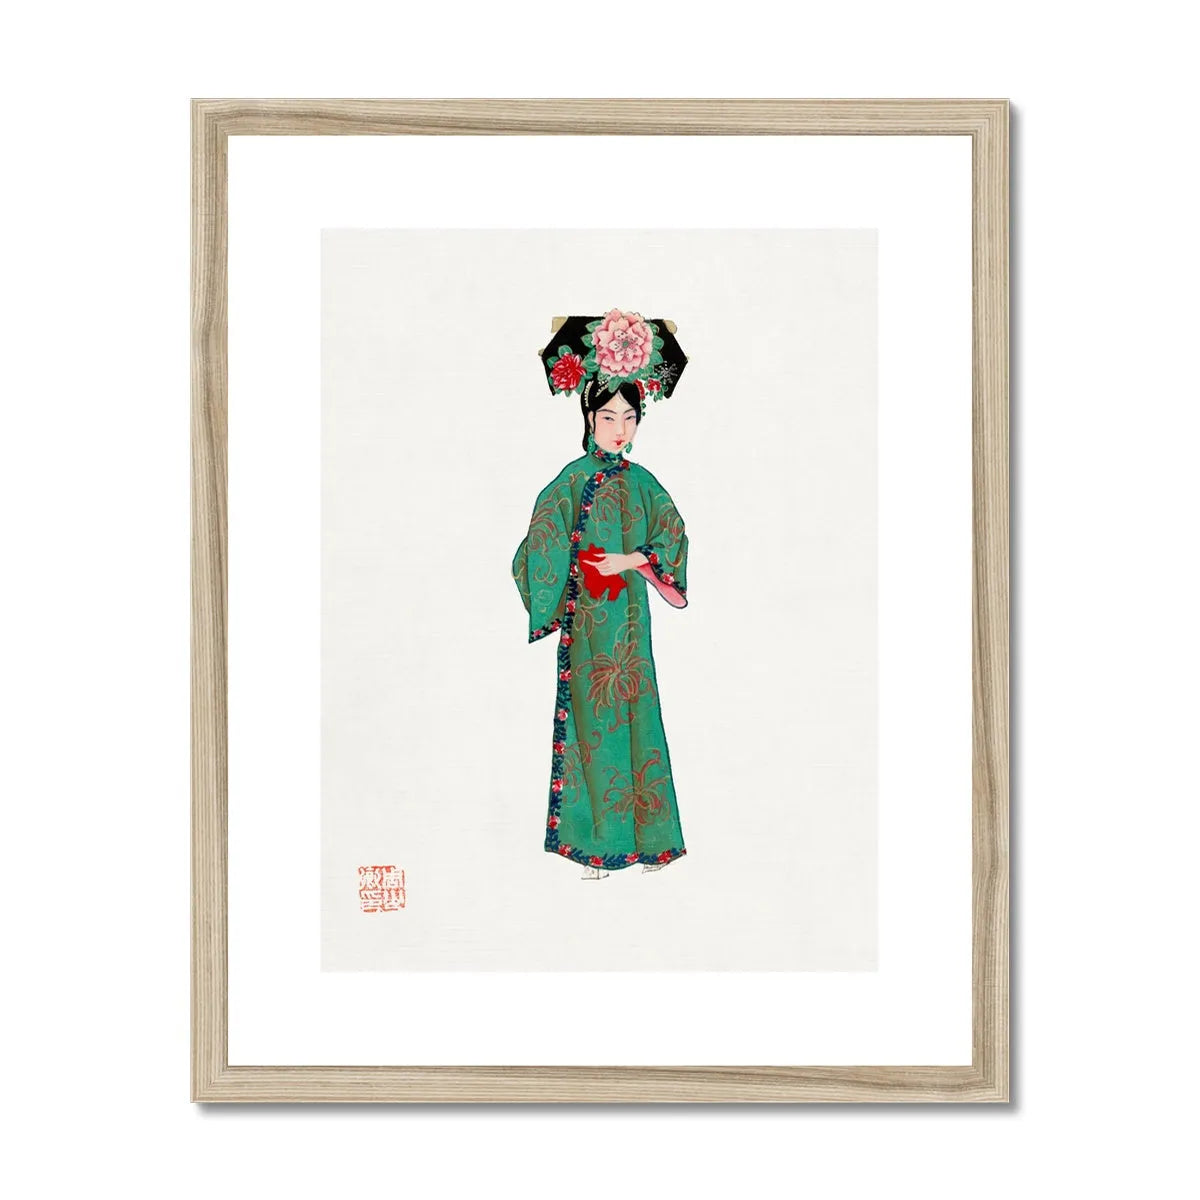 Chinese Noblewoman In Manchu Couture Framed & Mounted Print - 16’x20’ / Natural Frame - Posters Prints & Visual